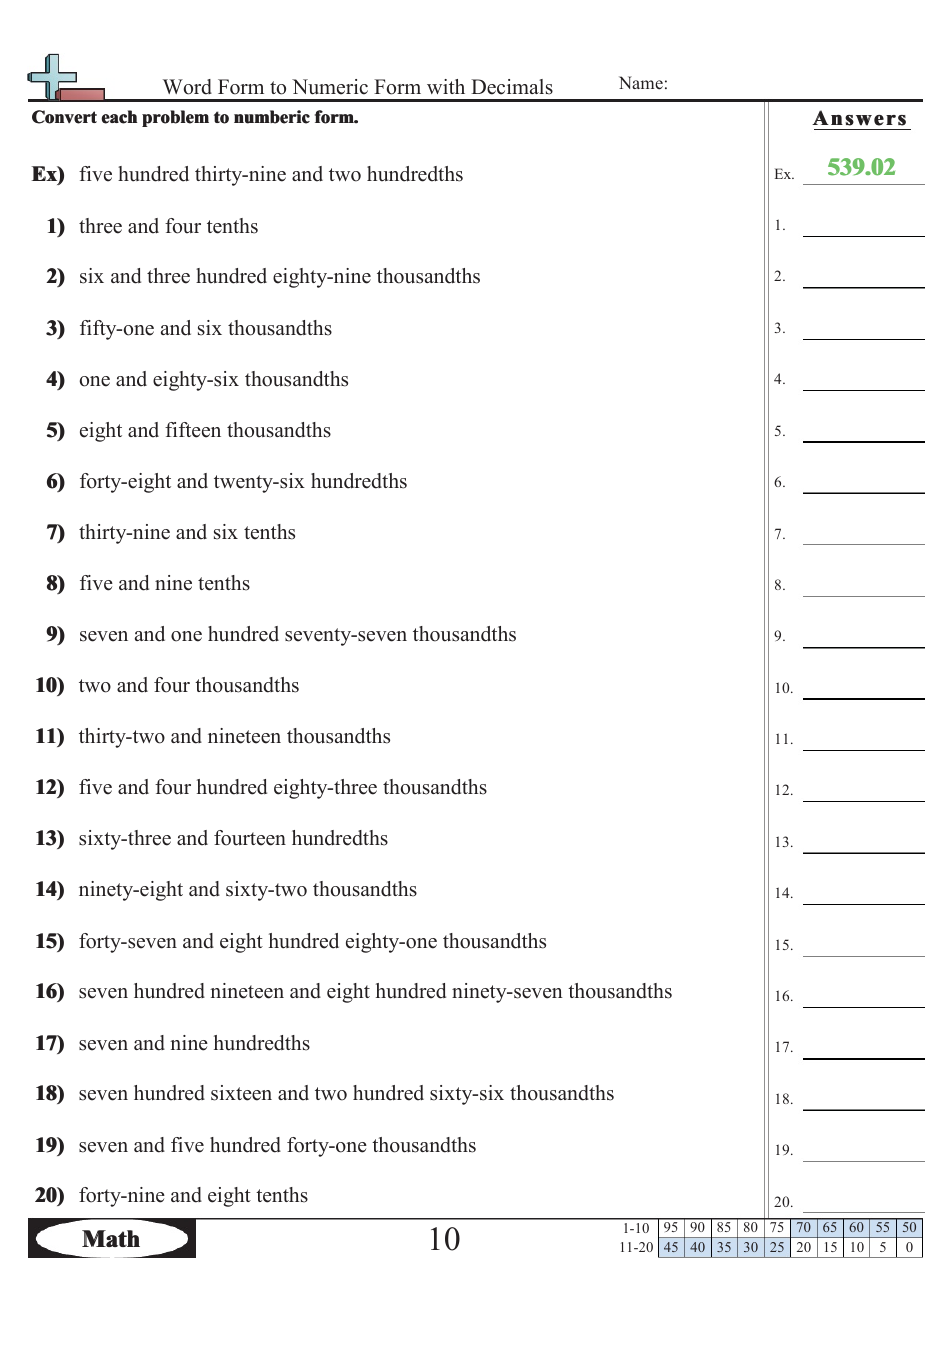 Word Form to Numeric Form With Decimals Worksheet With Answers - 539.02, Page 1